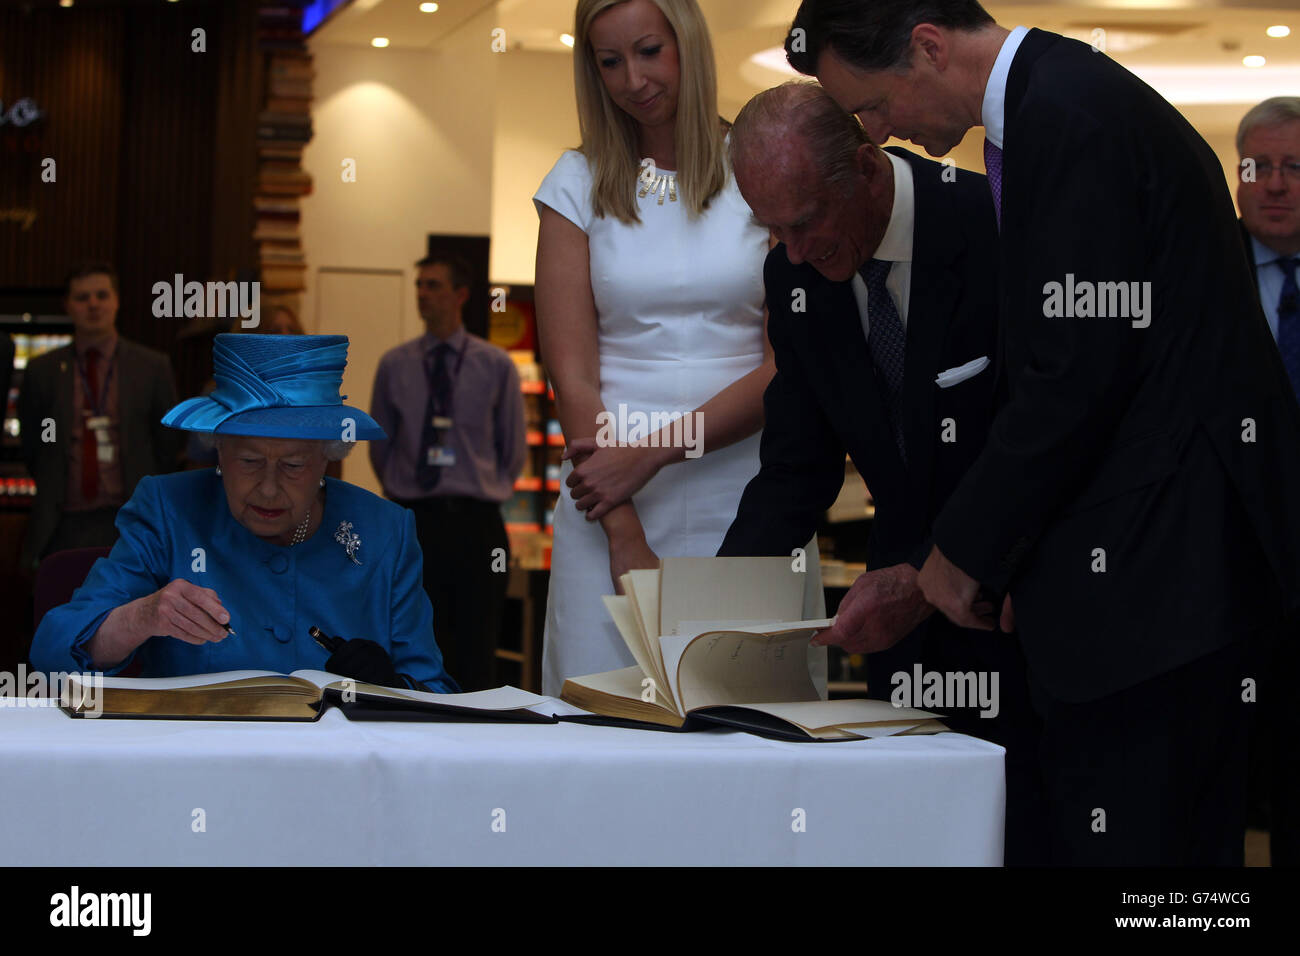 Queen Elizabeth II signs the new visitors book, as the Duke of Edinburgh looks through the visitors book from 1955, at the official opening of the new Terminal 2 The Queen's Terminal at Heathrow Airport. Stock Photo